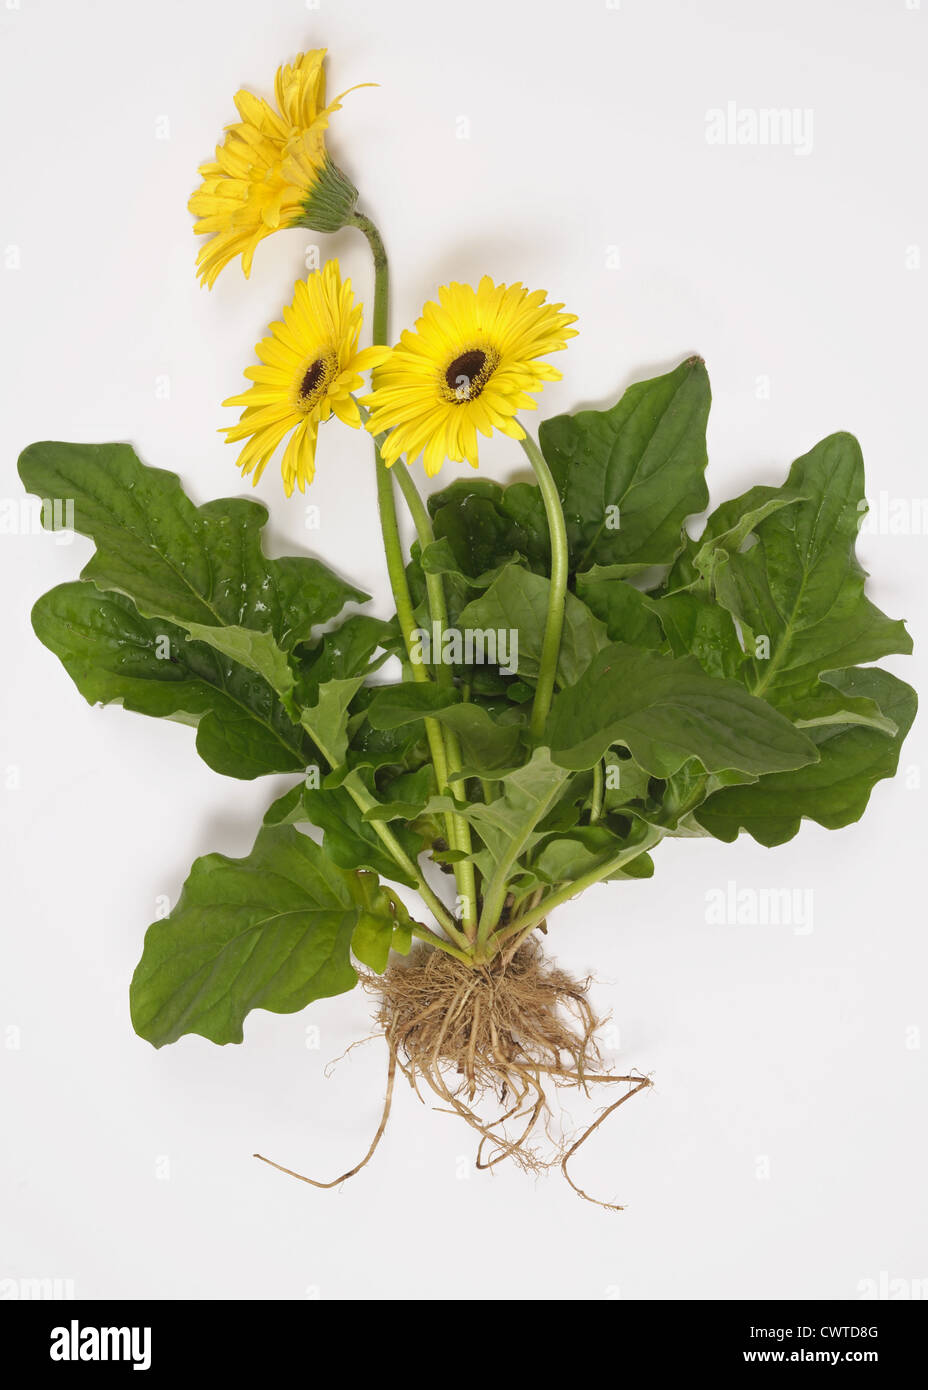 Gerbera plant with yellow flowers, leaves and roots exposed to show plant structure Stock Photo